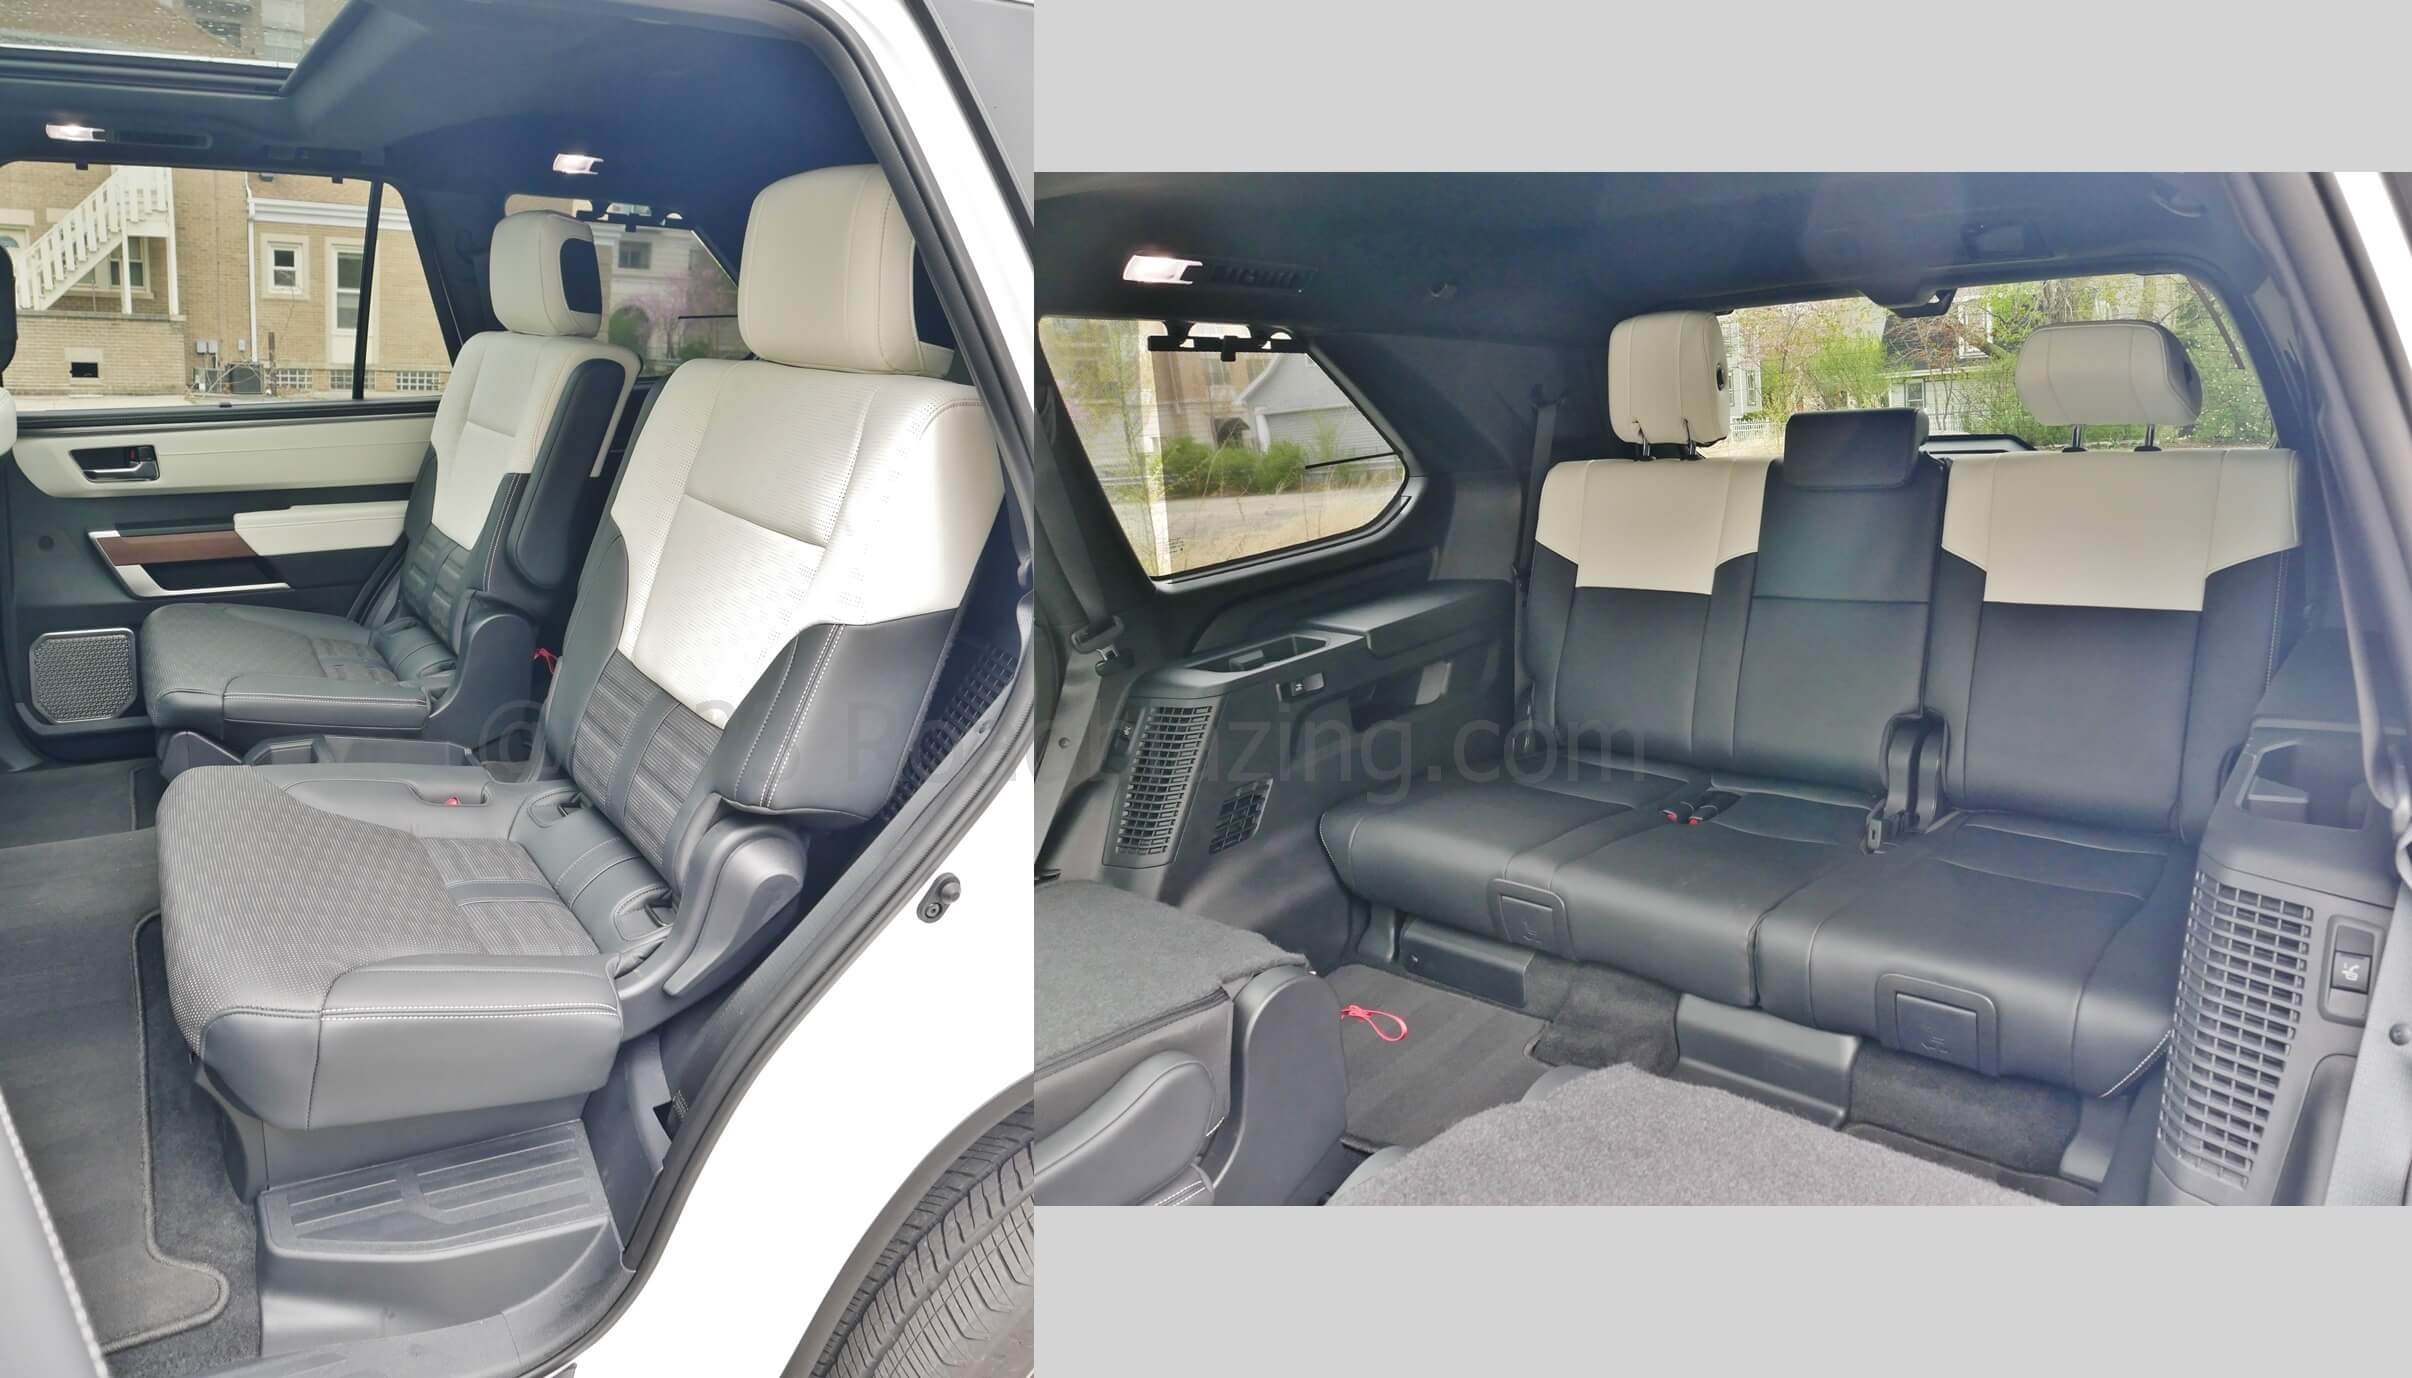 2023 Toyota Sequoia Capstone 4x4: 2nd Row heated & cooled captain's chairs, 3rd Row for 2.5 adults.